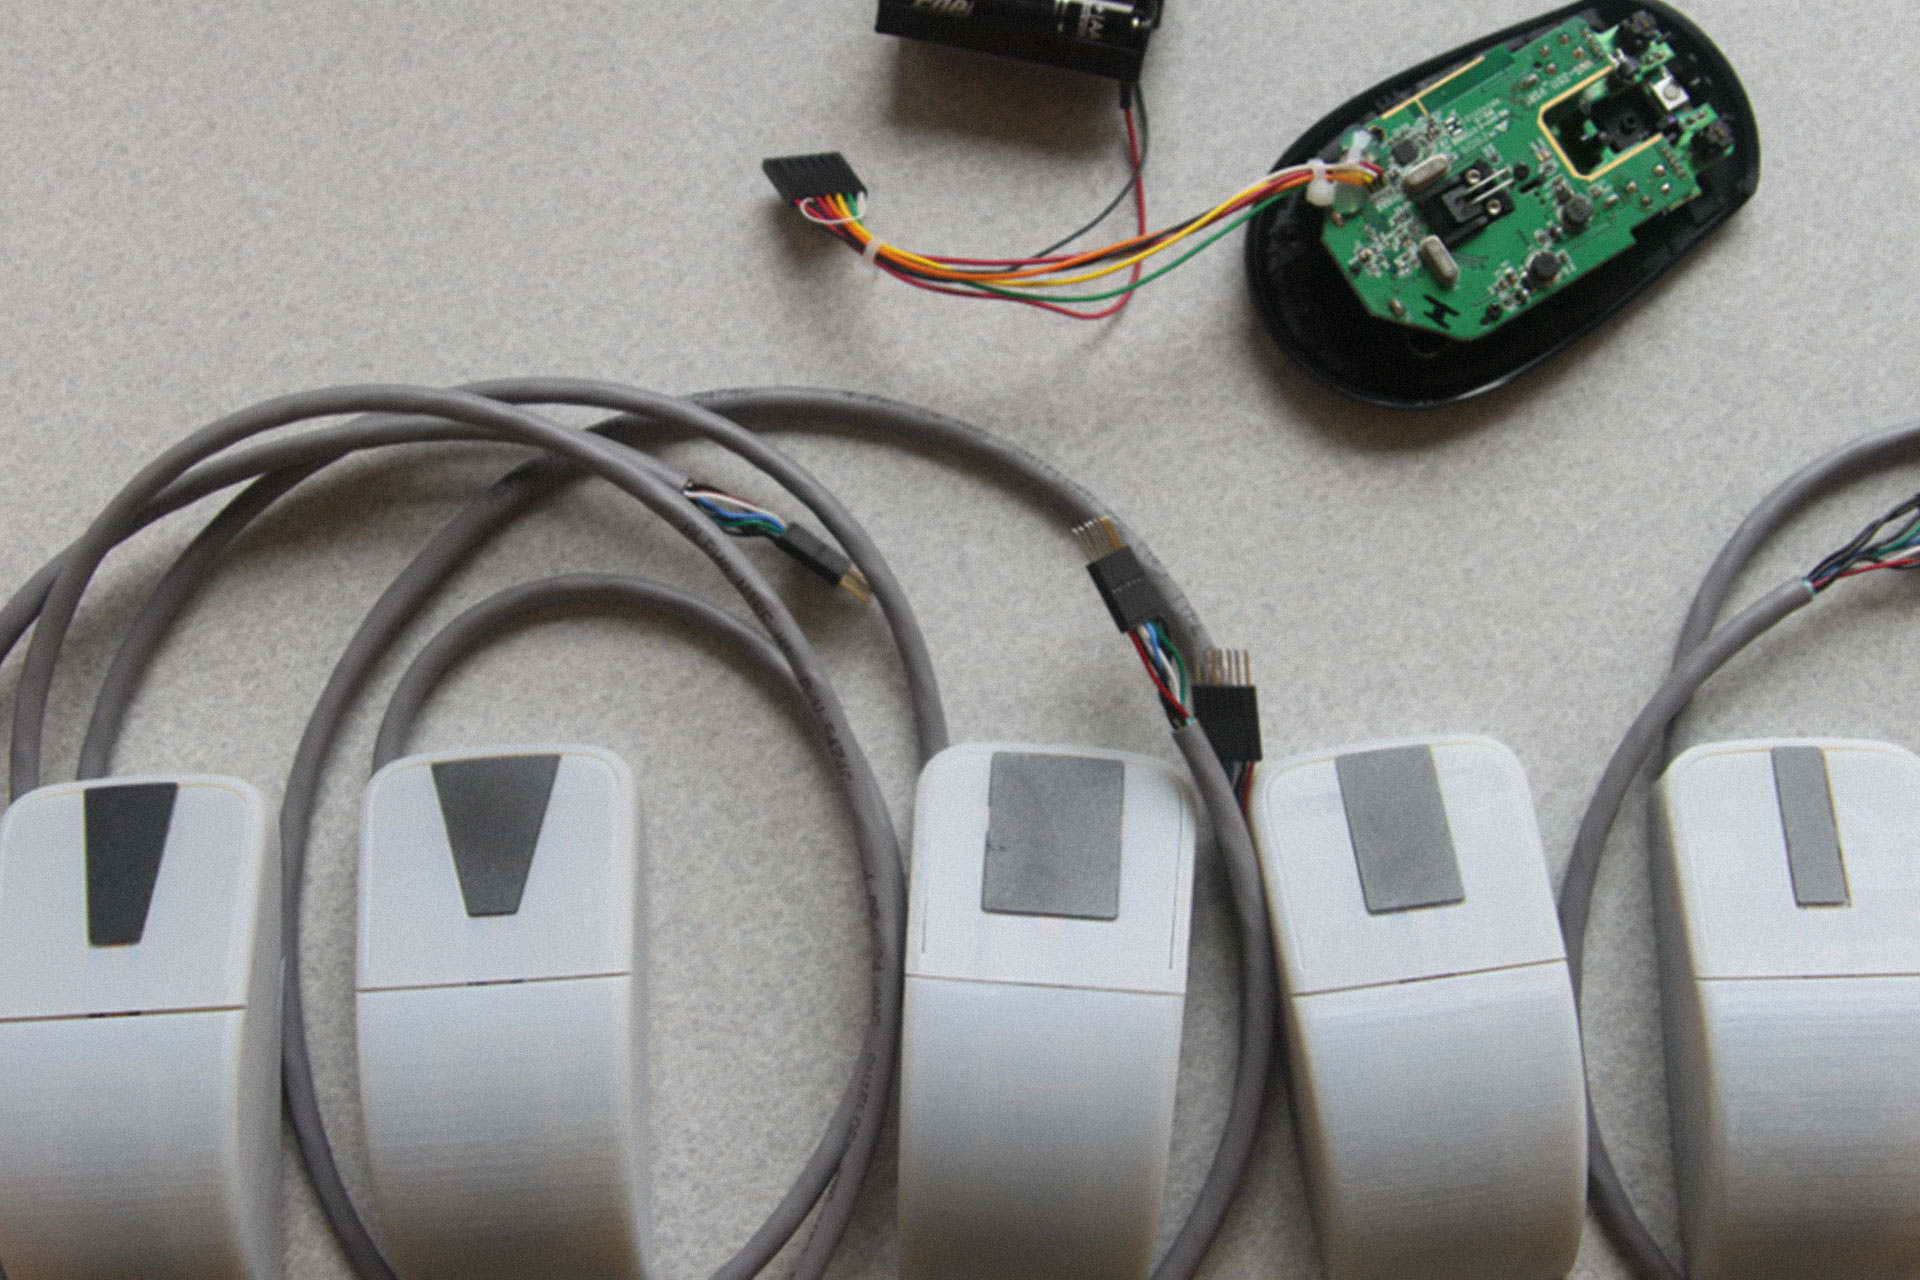 Microsoft Explorer Touch Mouse - hardware prototyping for horizontal scrolling